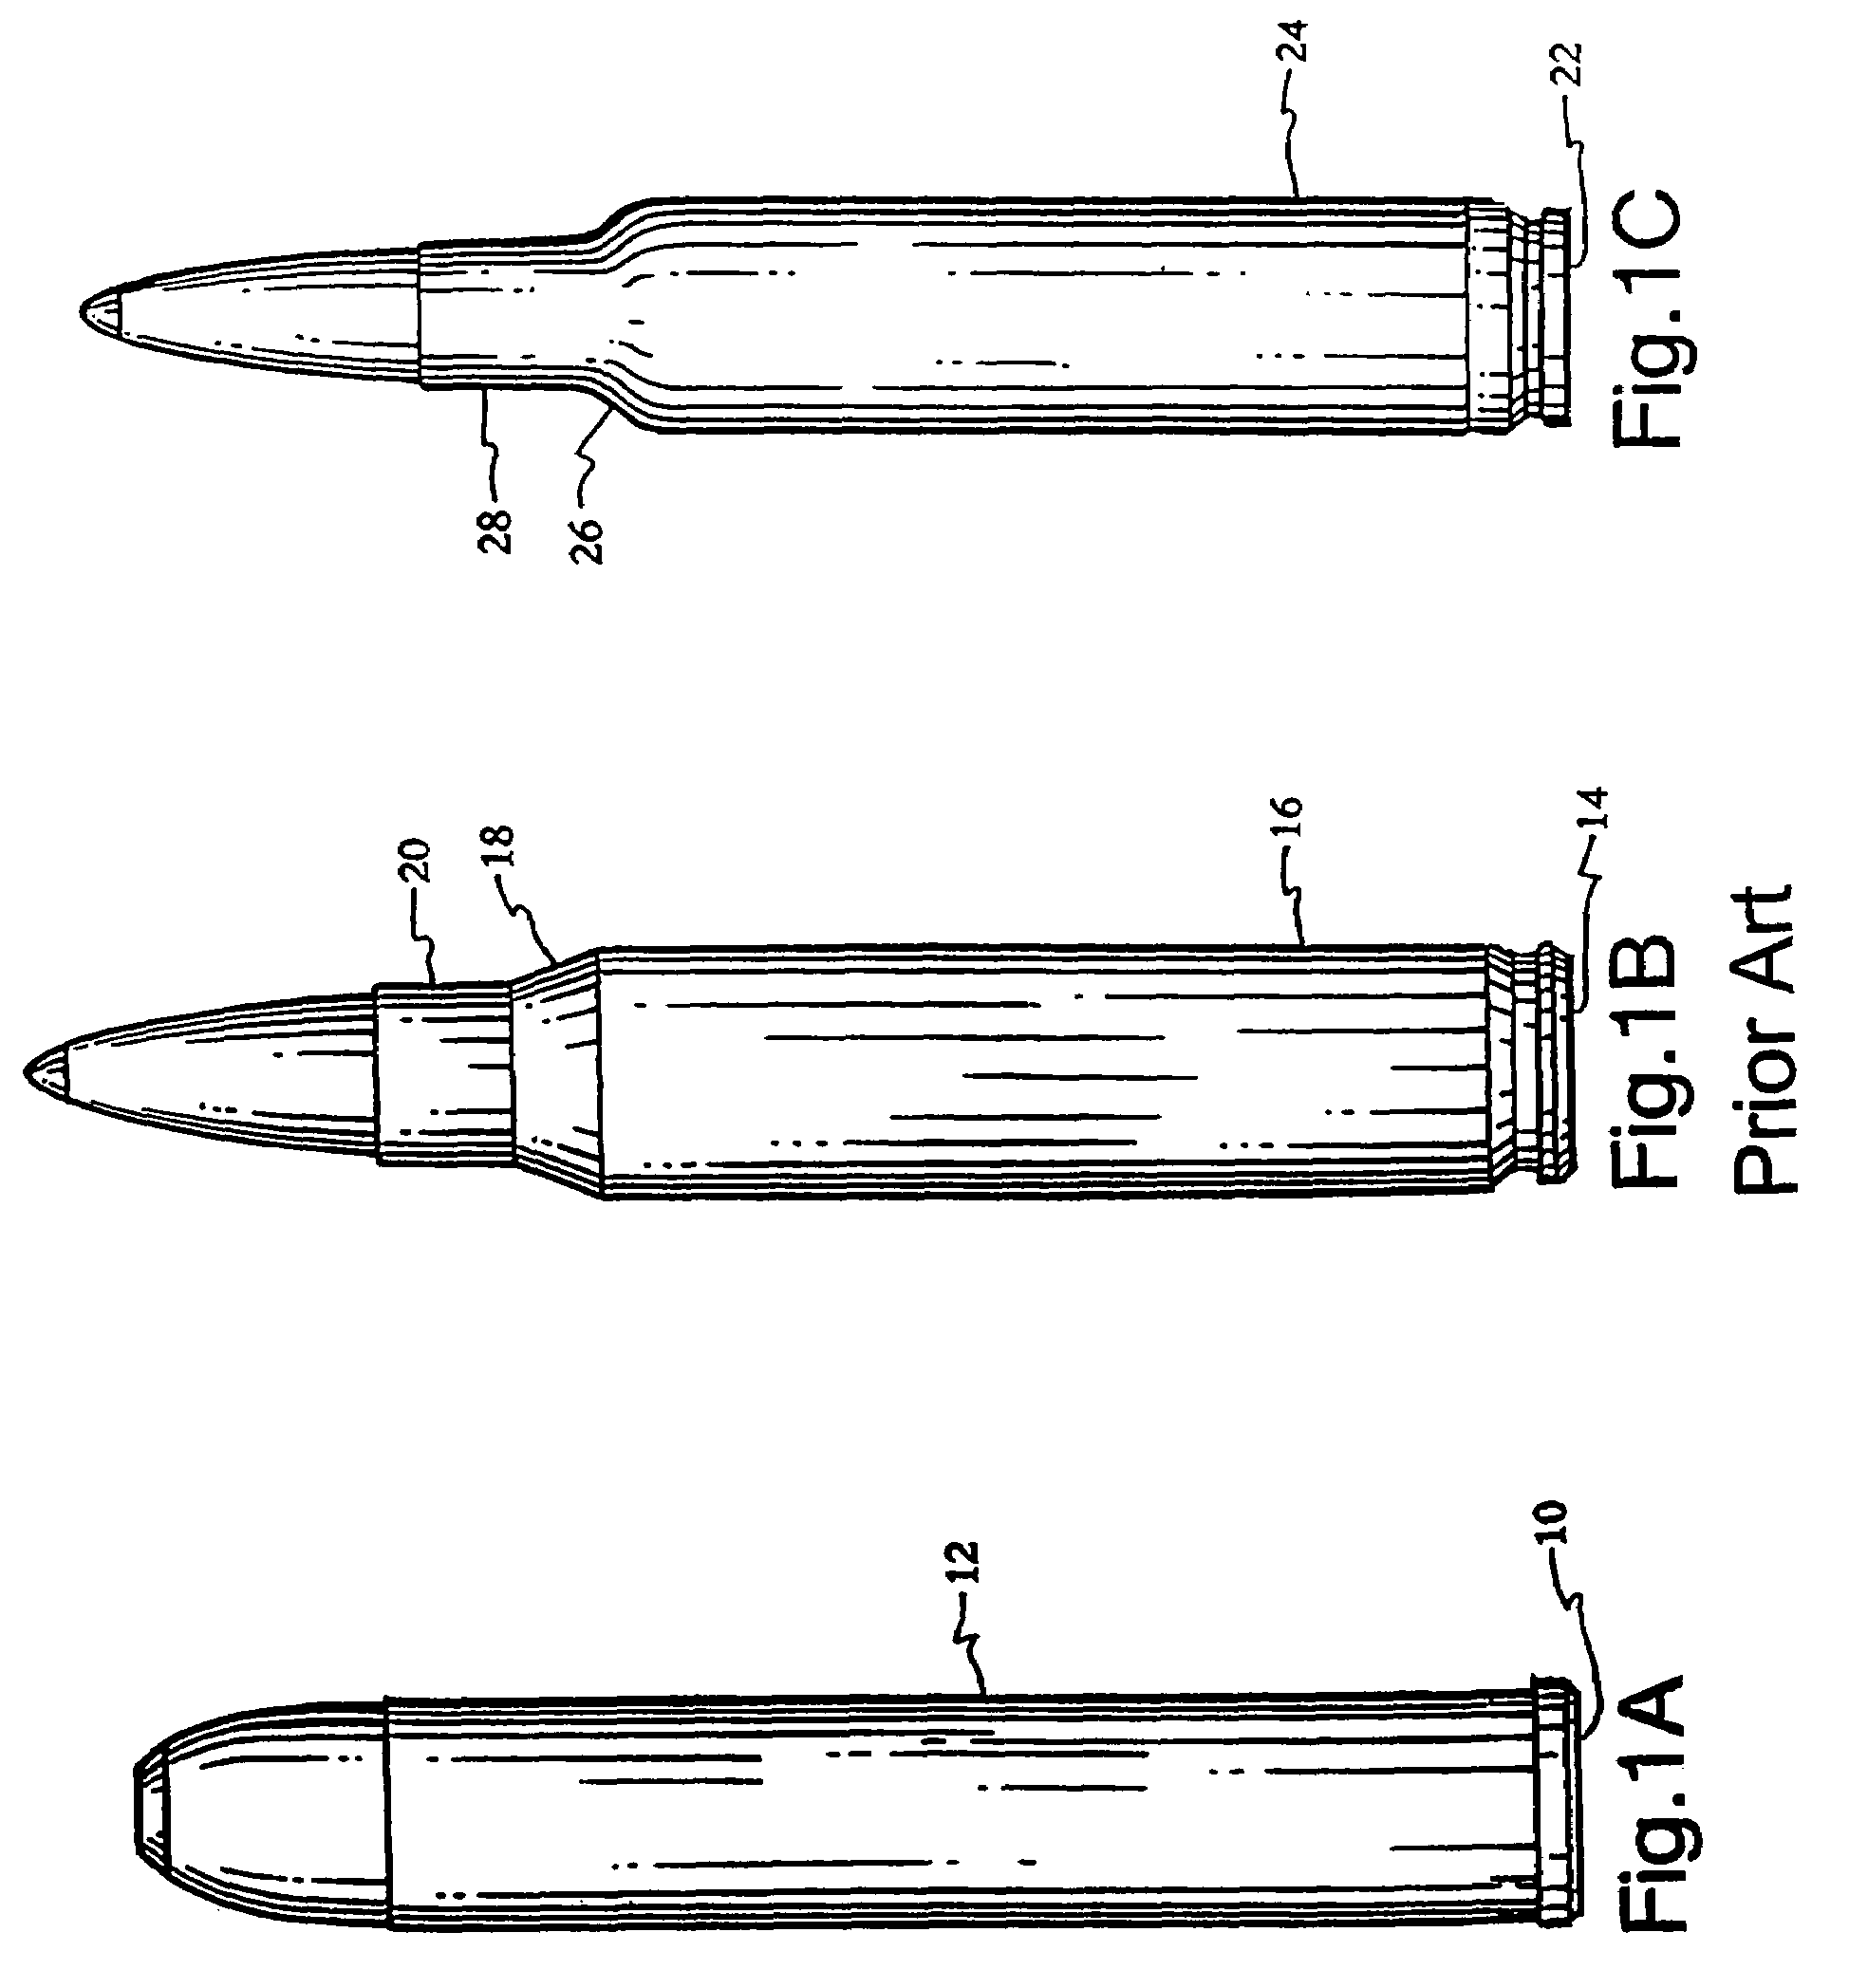 Firearm cartridge and case-less chamber